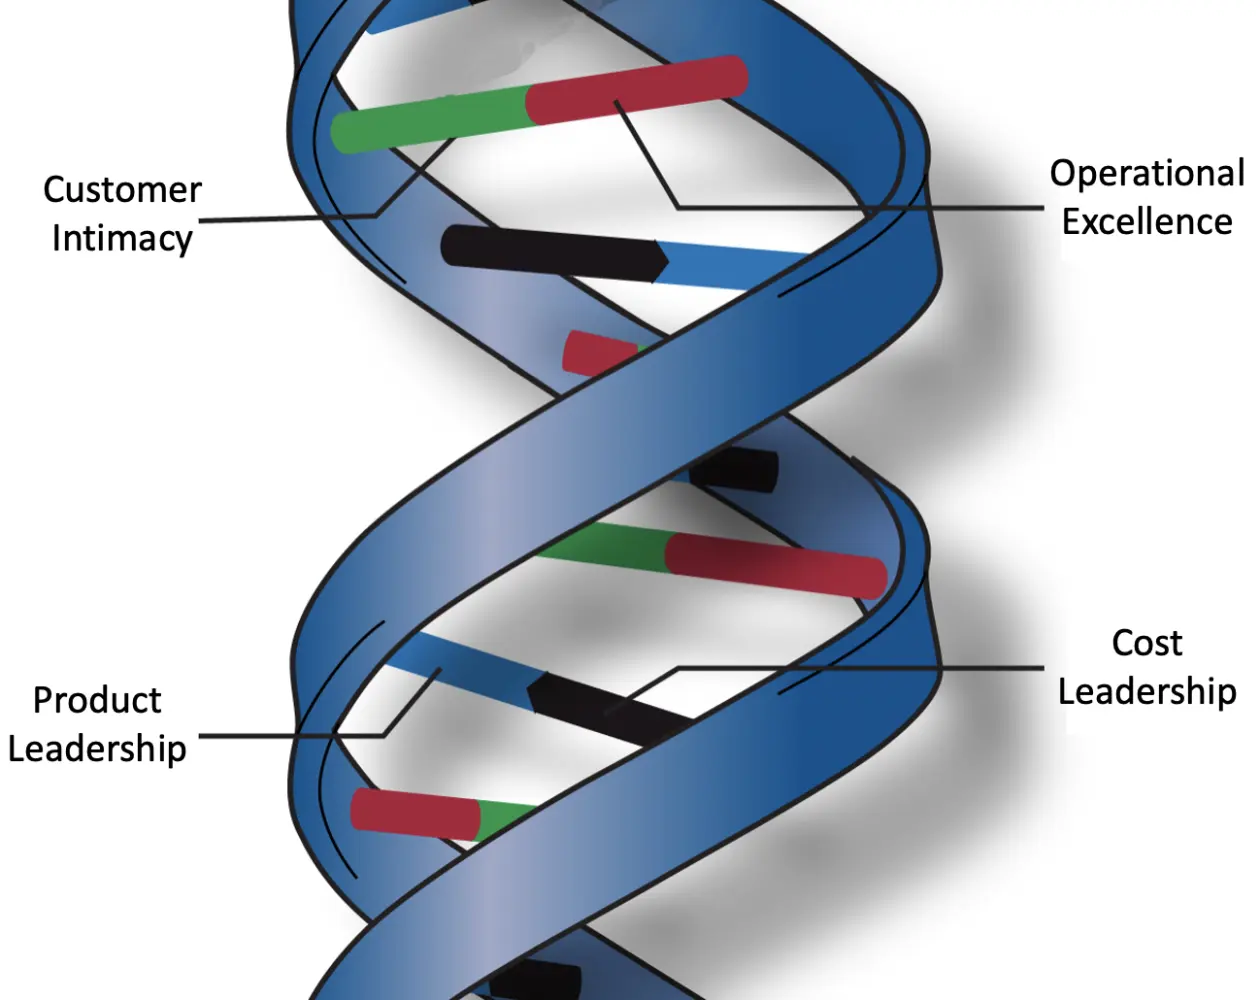 A DNA strand showing that customer intimacy connects to operational excellence, and product leadership connects to cost leadership.